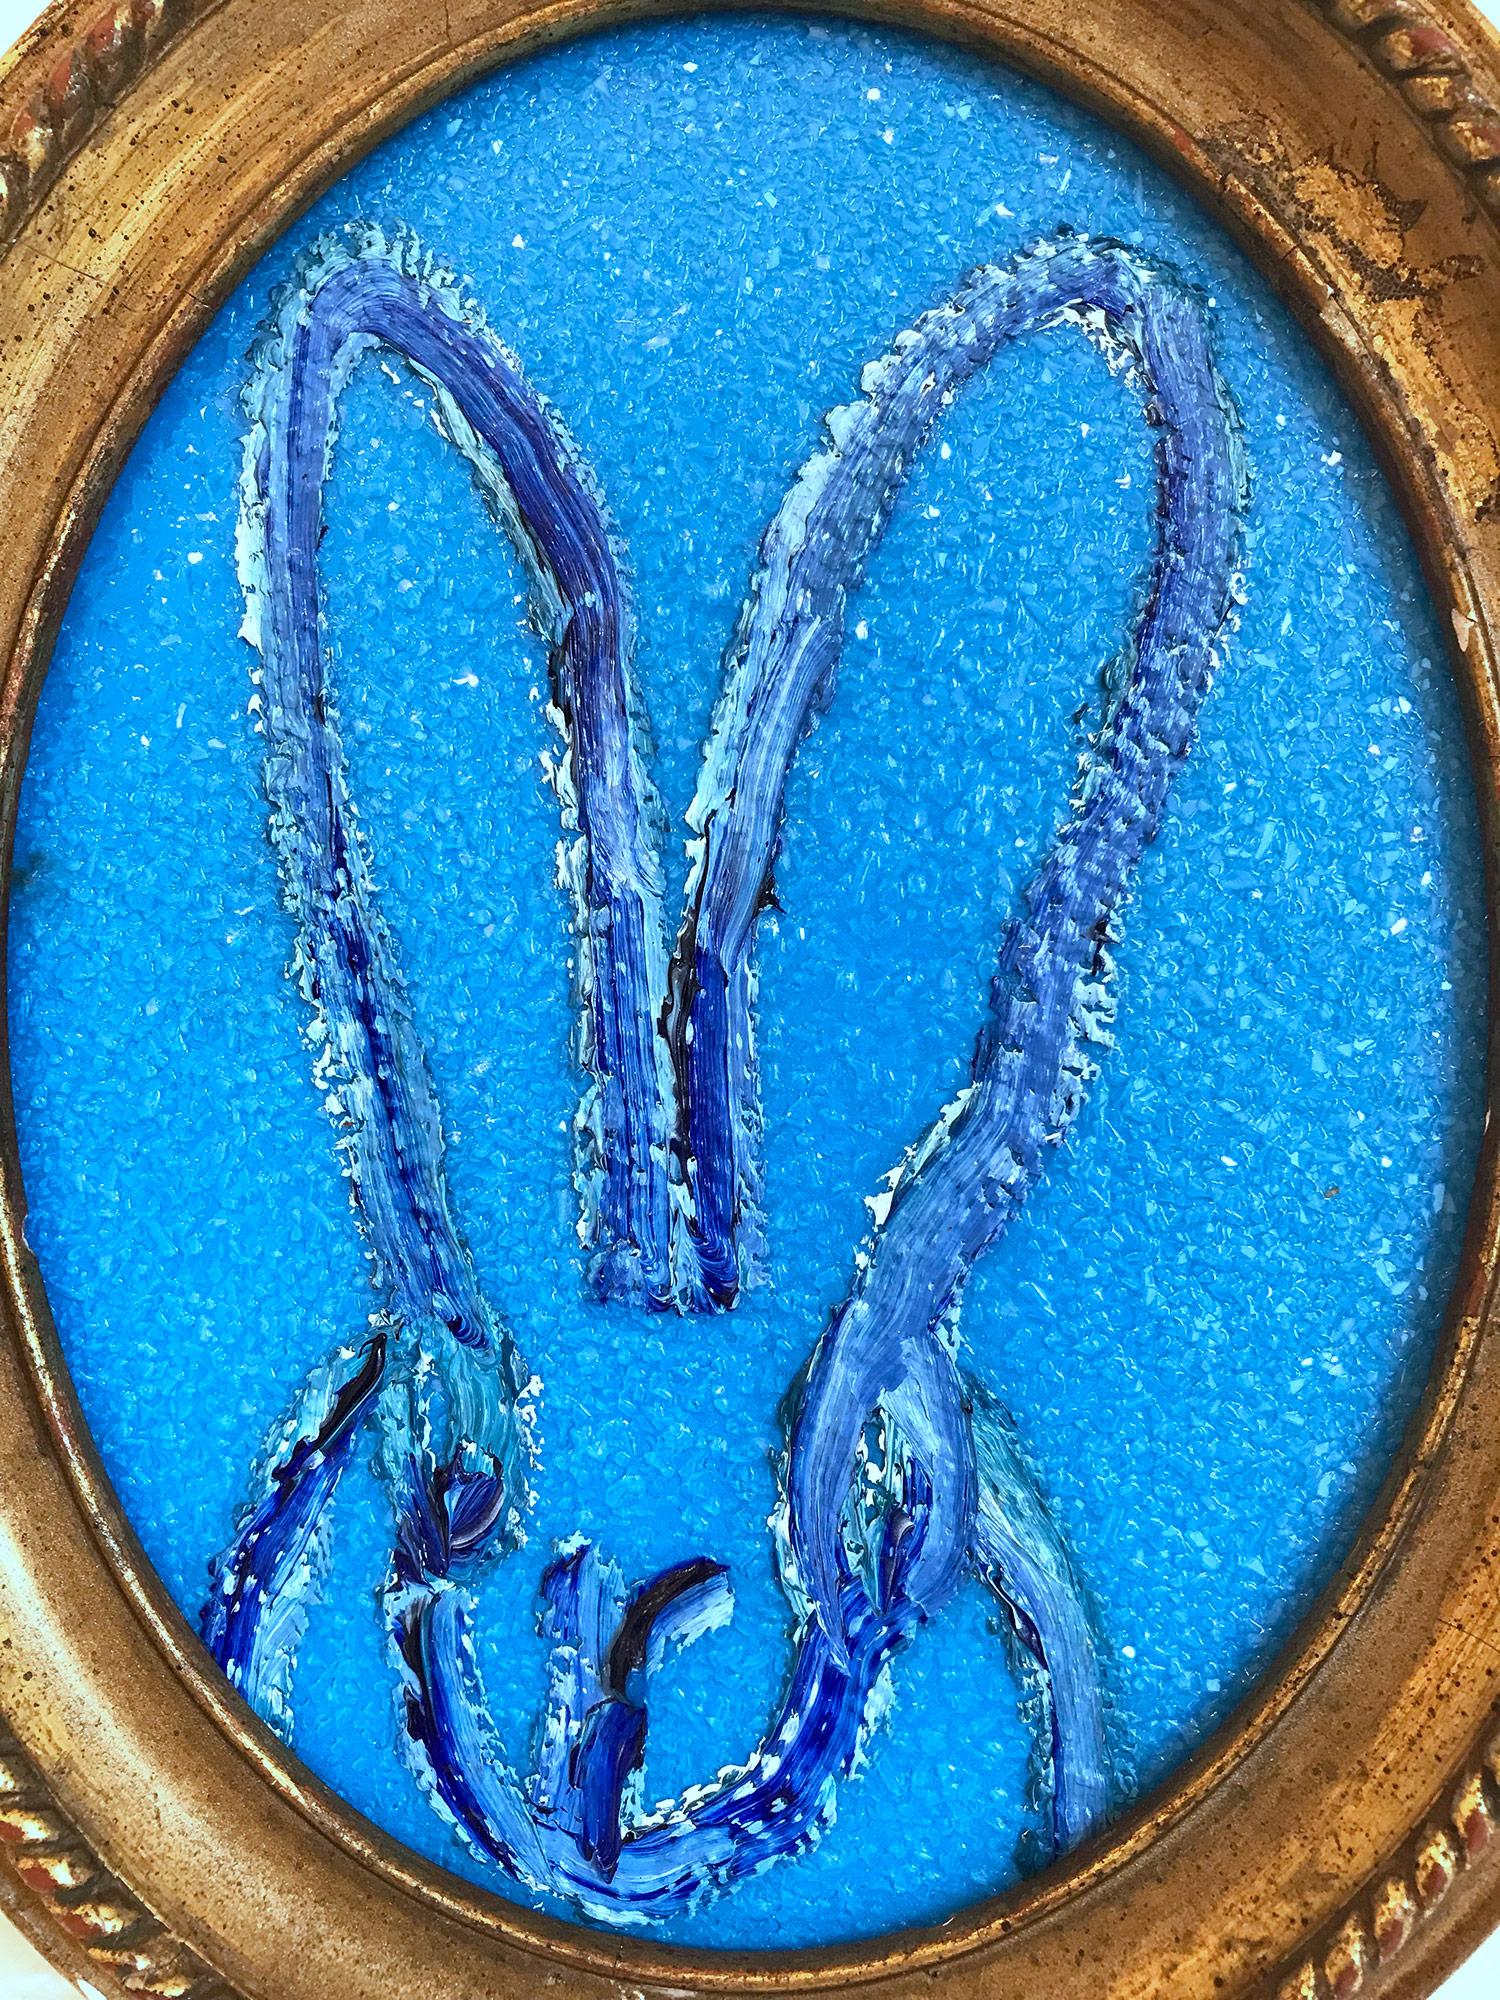 A wonderful composition of one of Slonem's most iconic subjects, Bunnies. This piece depicts a gestural figure of a blue bunny on a bright cobalt blue background with thick use of paint and diamond dust. It is housed in a wonderful antique 19th